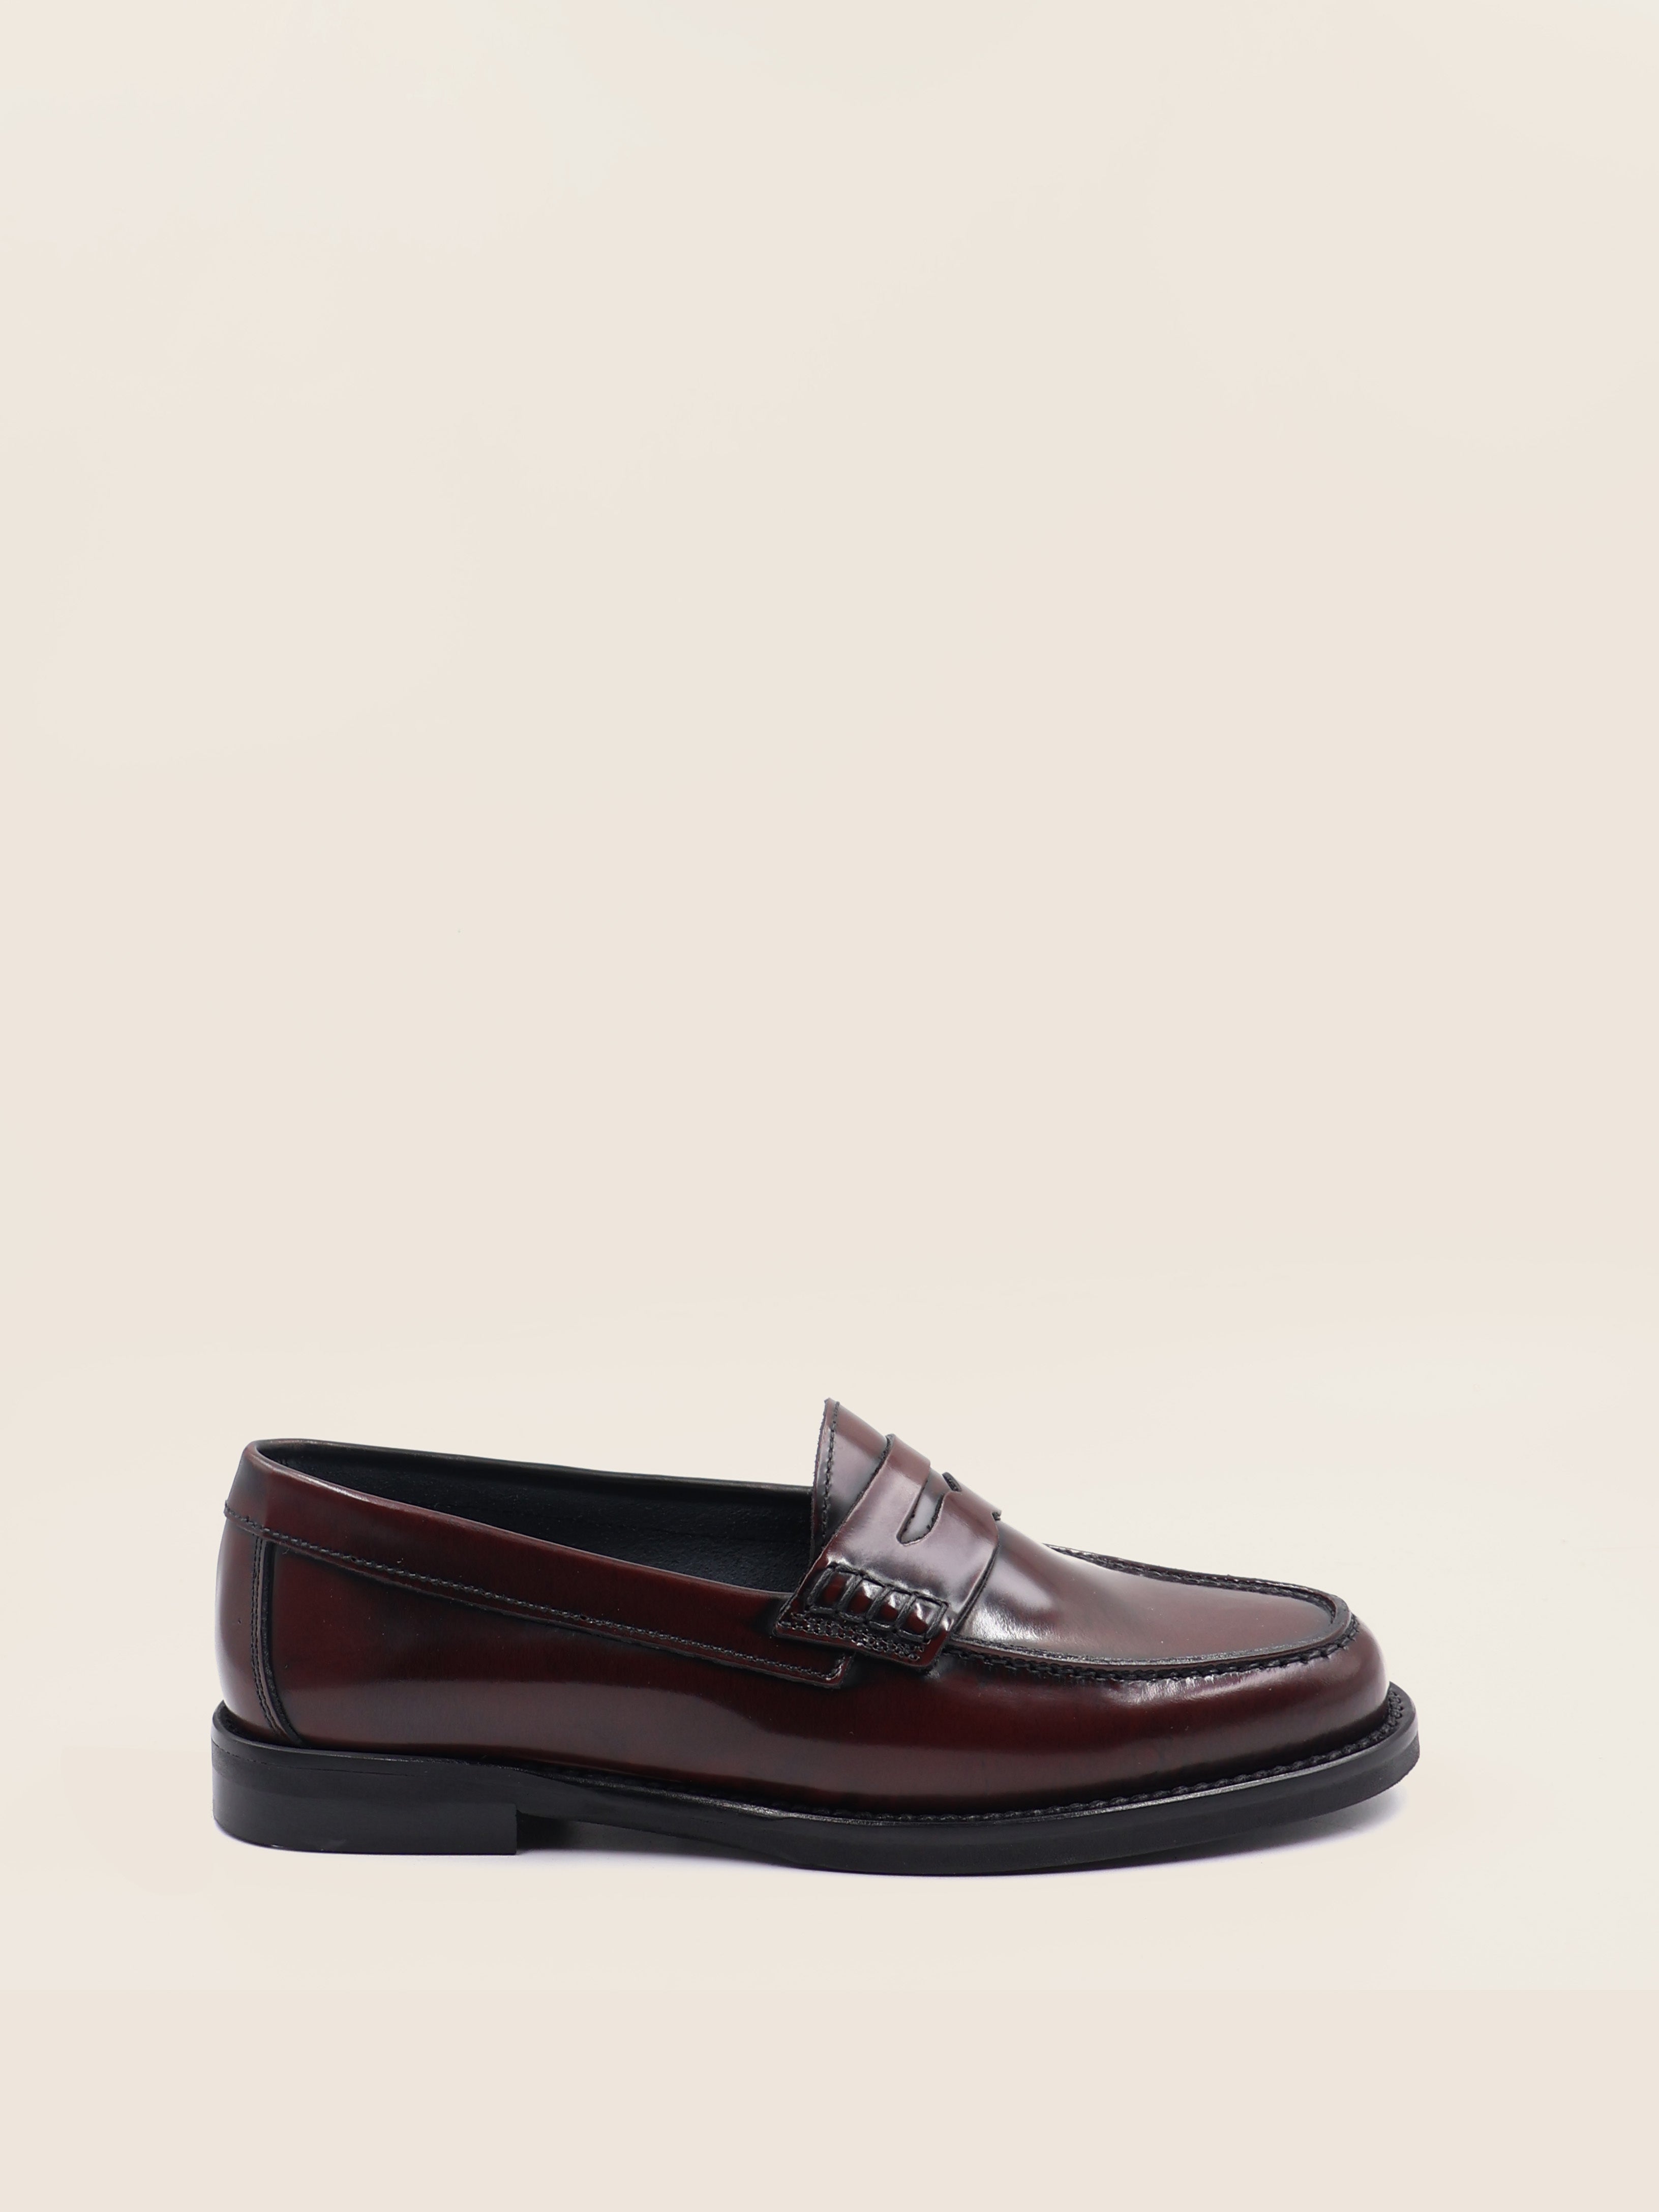 Maguire Napoli Penny Loafer - Bordeaux